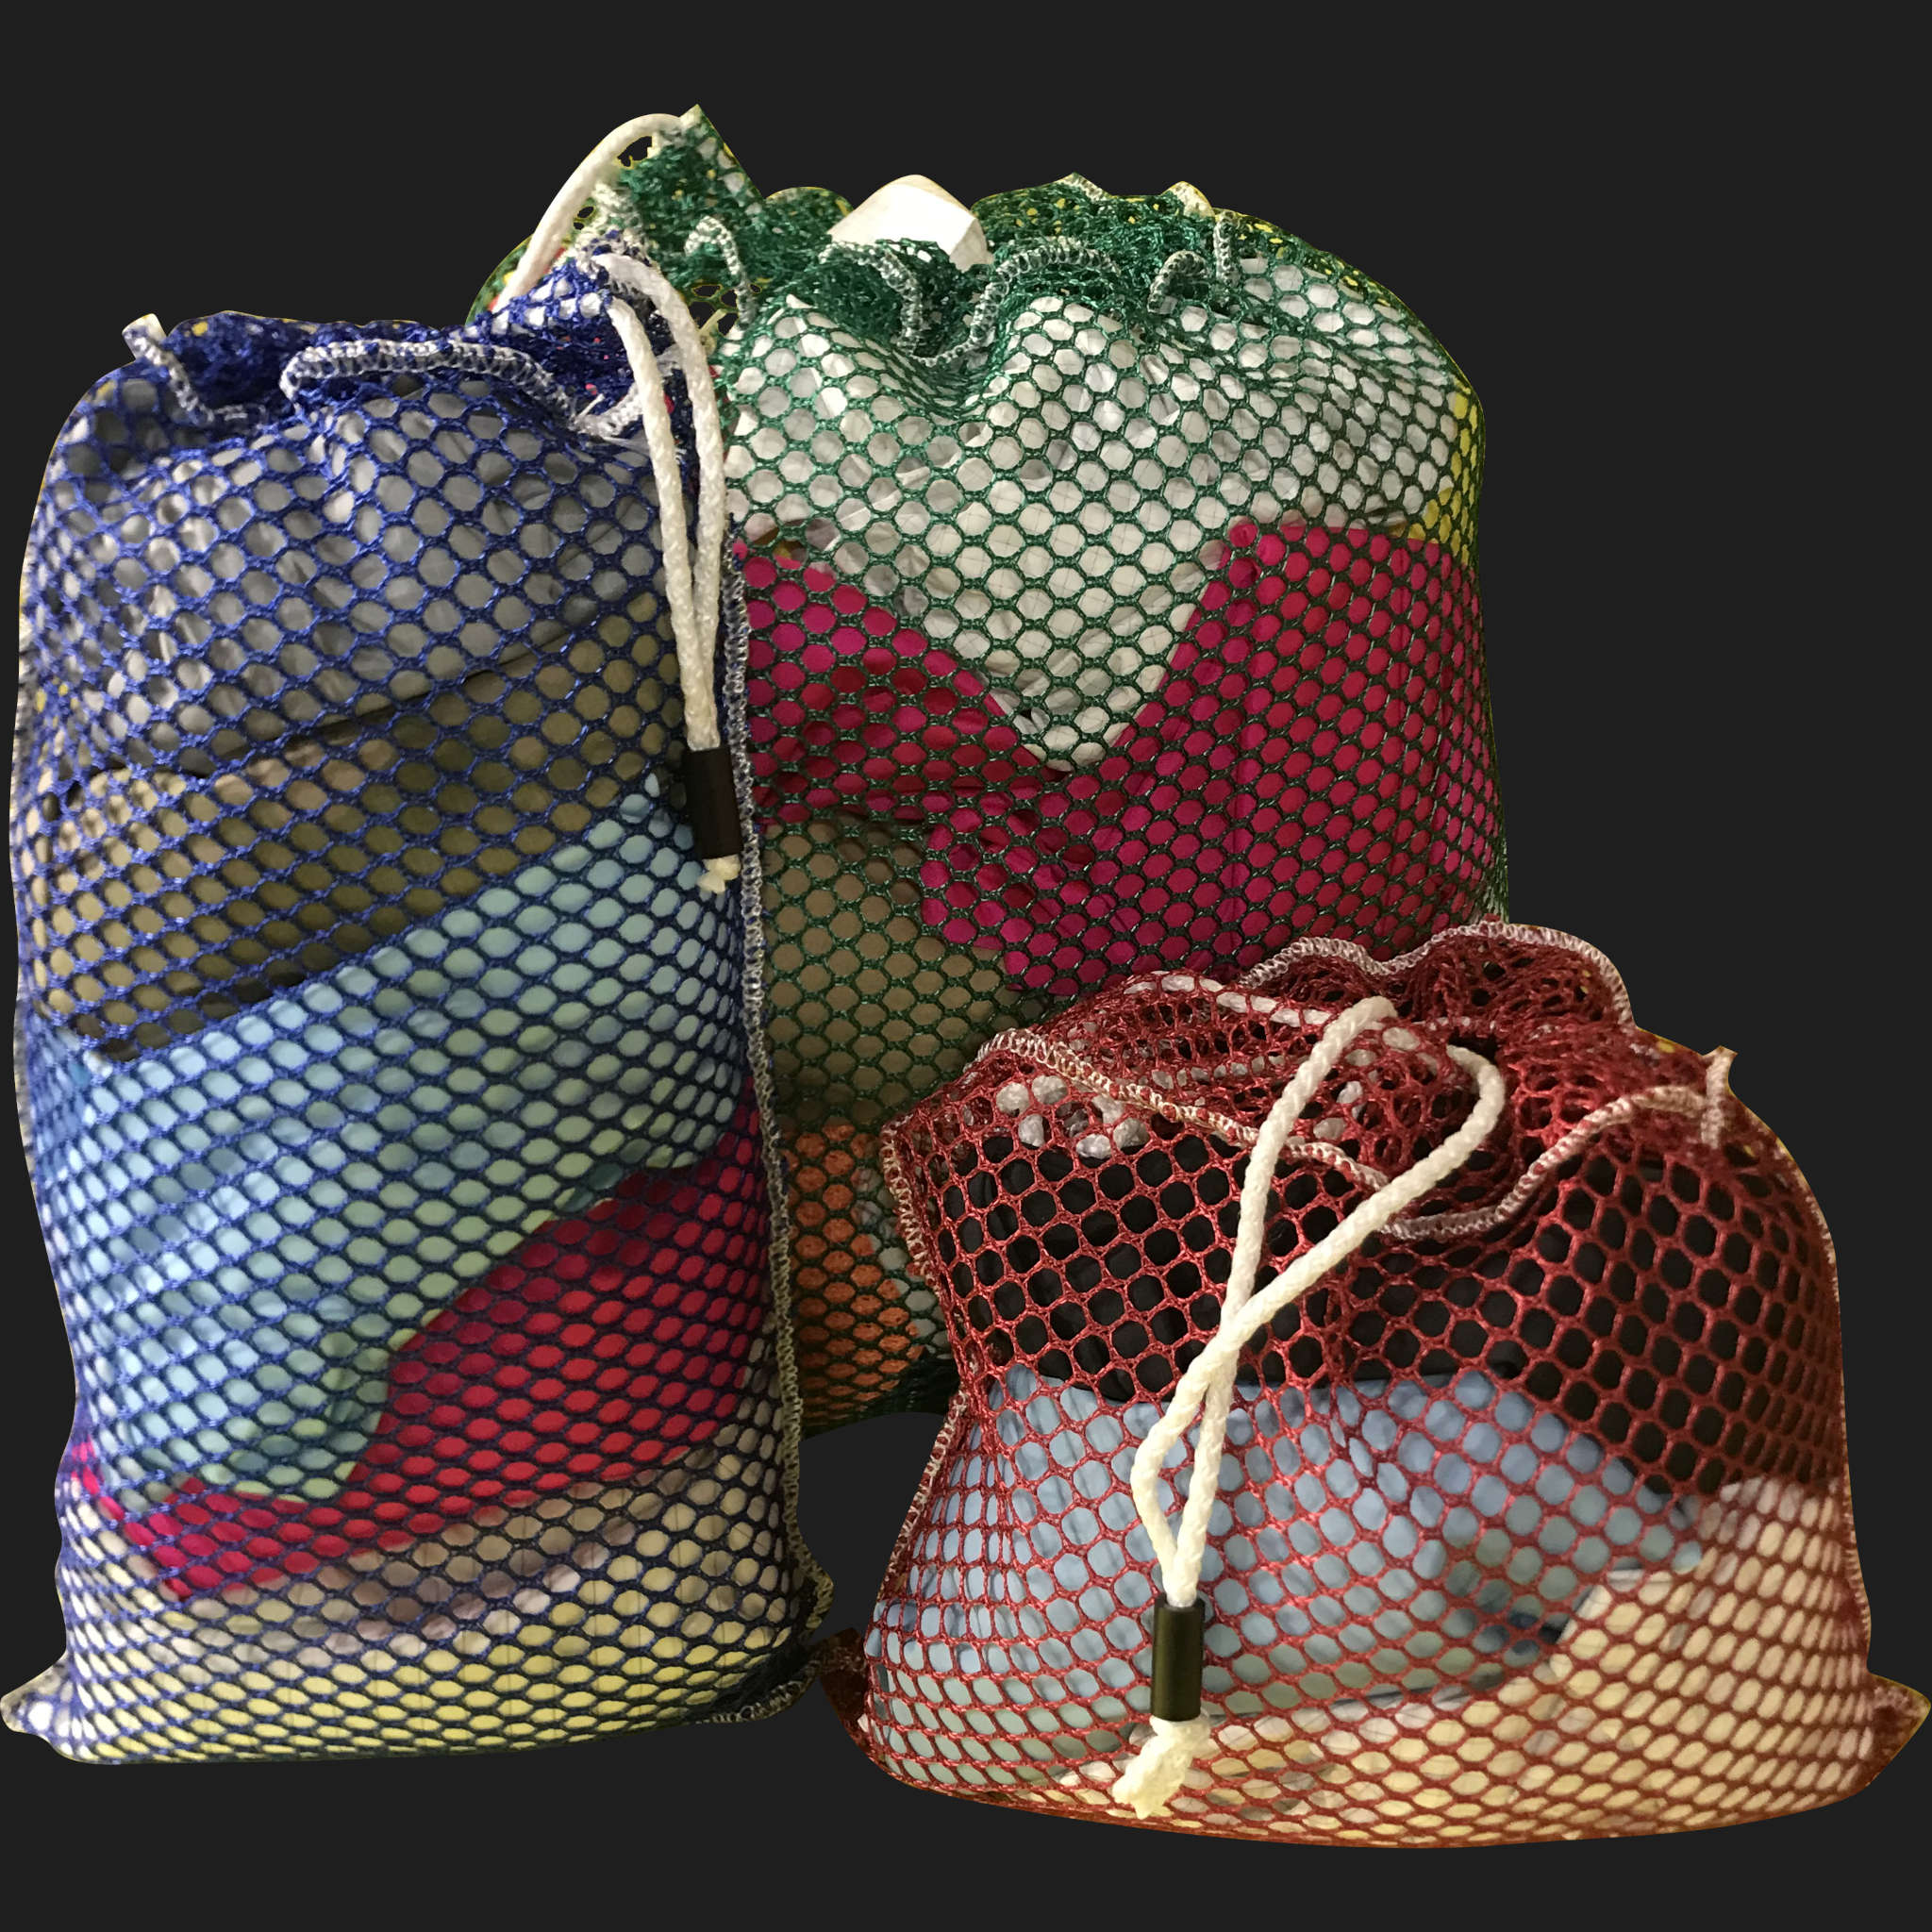 30" x 48" Customized Mesh-Net-Laundry Bags Heavy Duty with Cord and barrellock closure